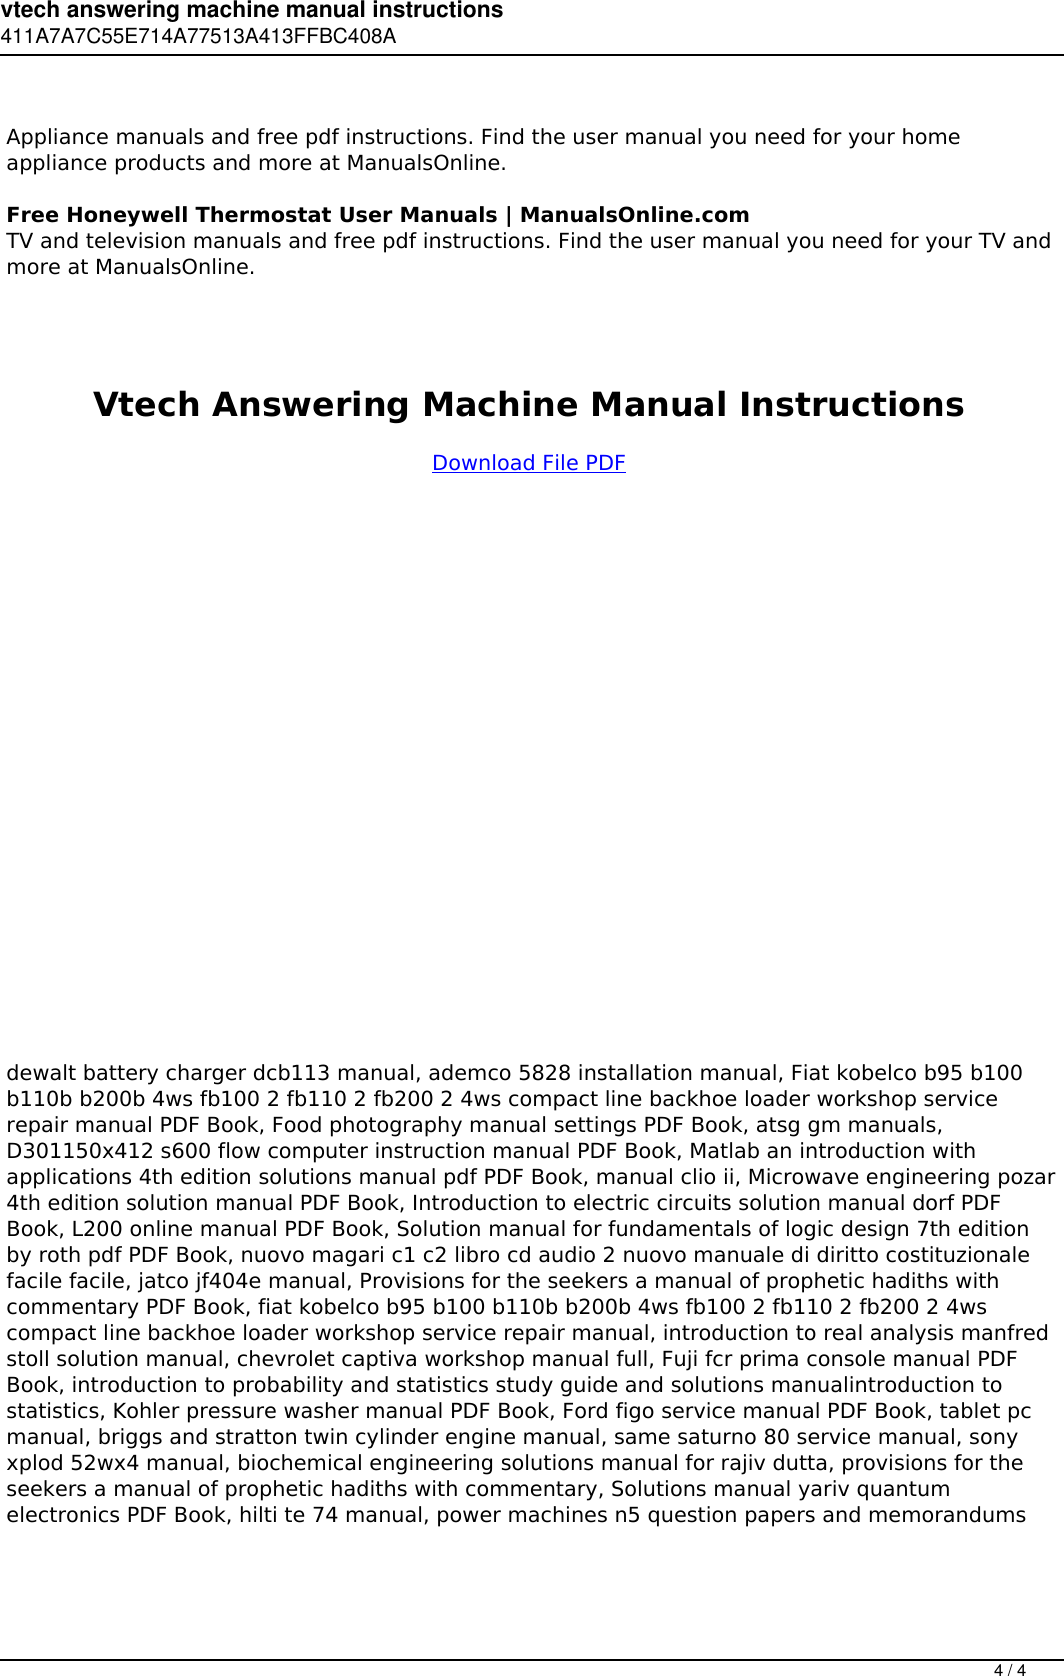 Page 4 of 4 - Vtech Answering Machine Manual Instructions